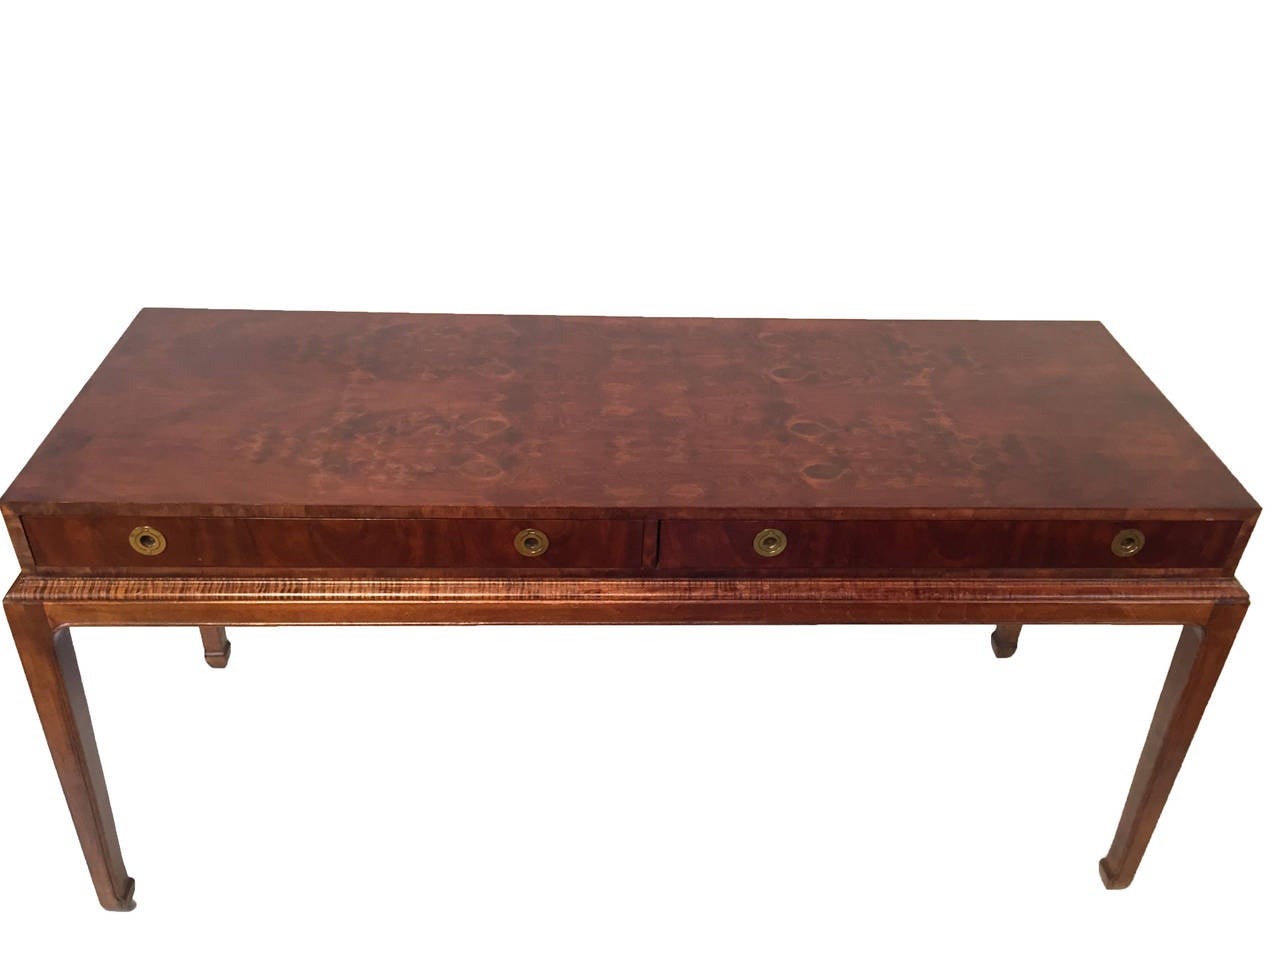 Asian Campaign style desk or console by Henredon. Burl veneered top has the appearance of resting on base. Inlaid brass pulls. Rosewood stain satin luster  finish in usable condition or re-lacquer to suit.